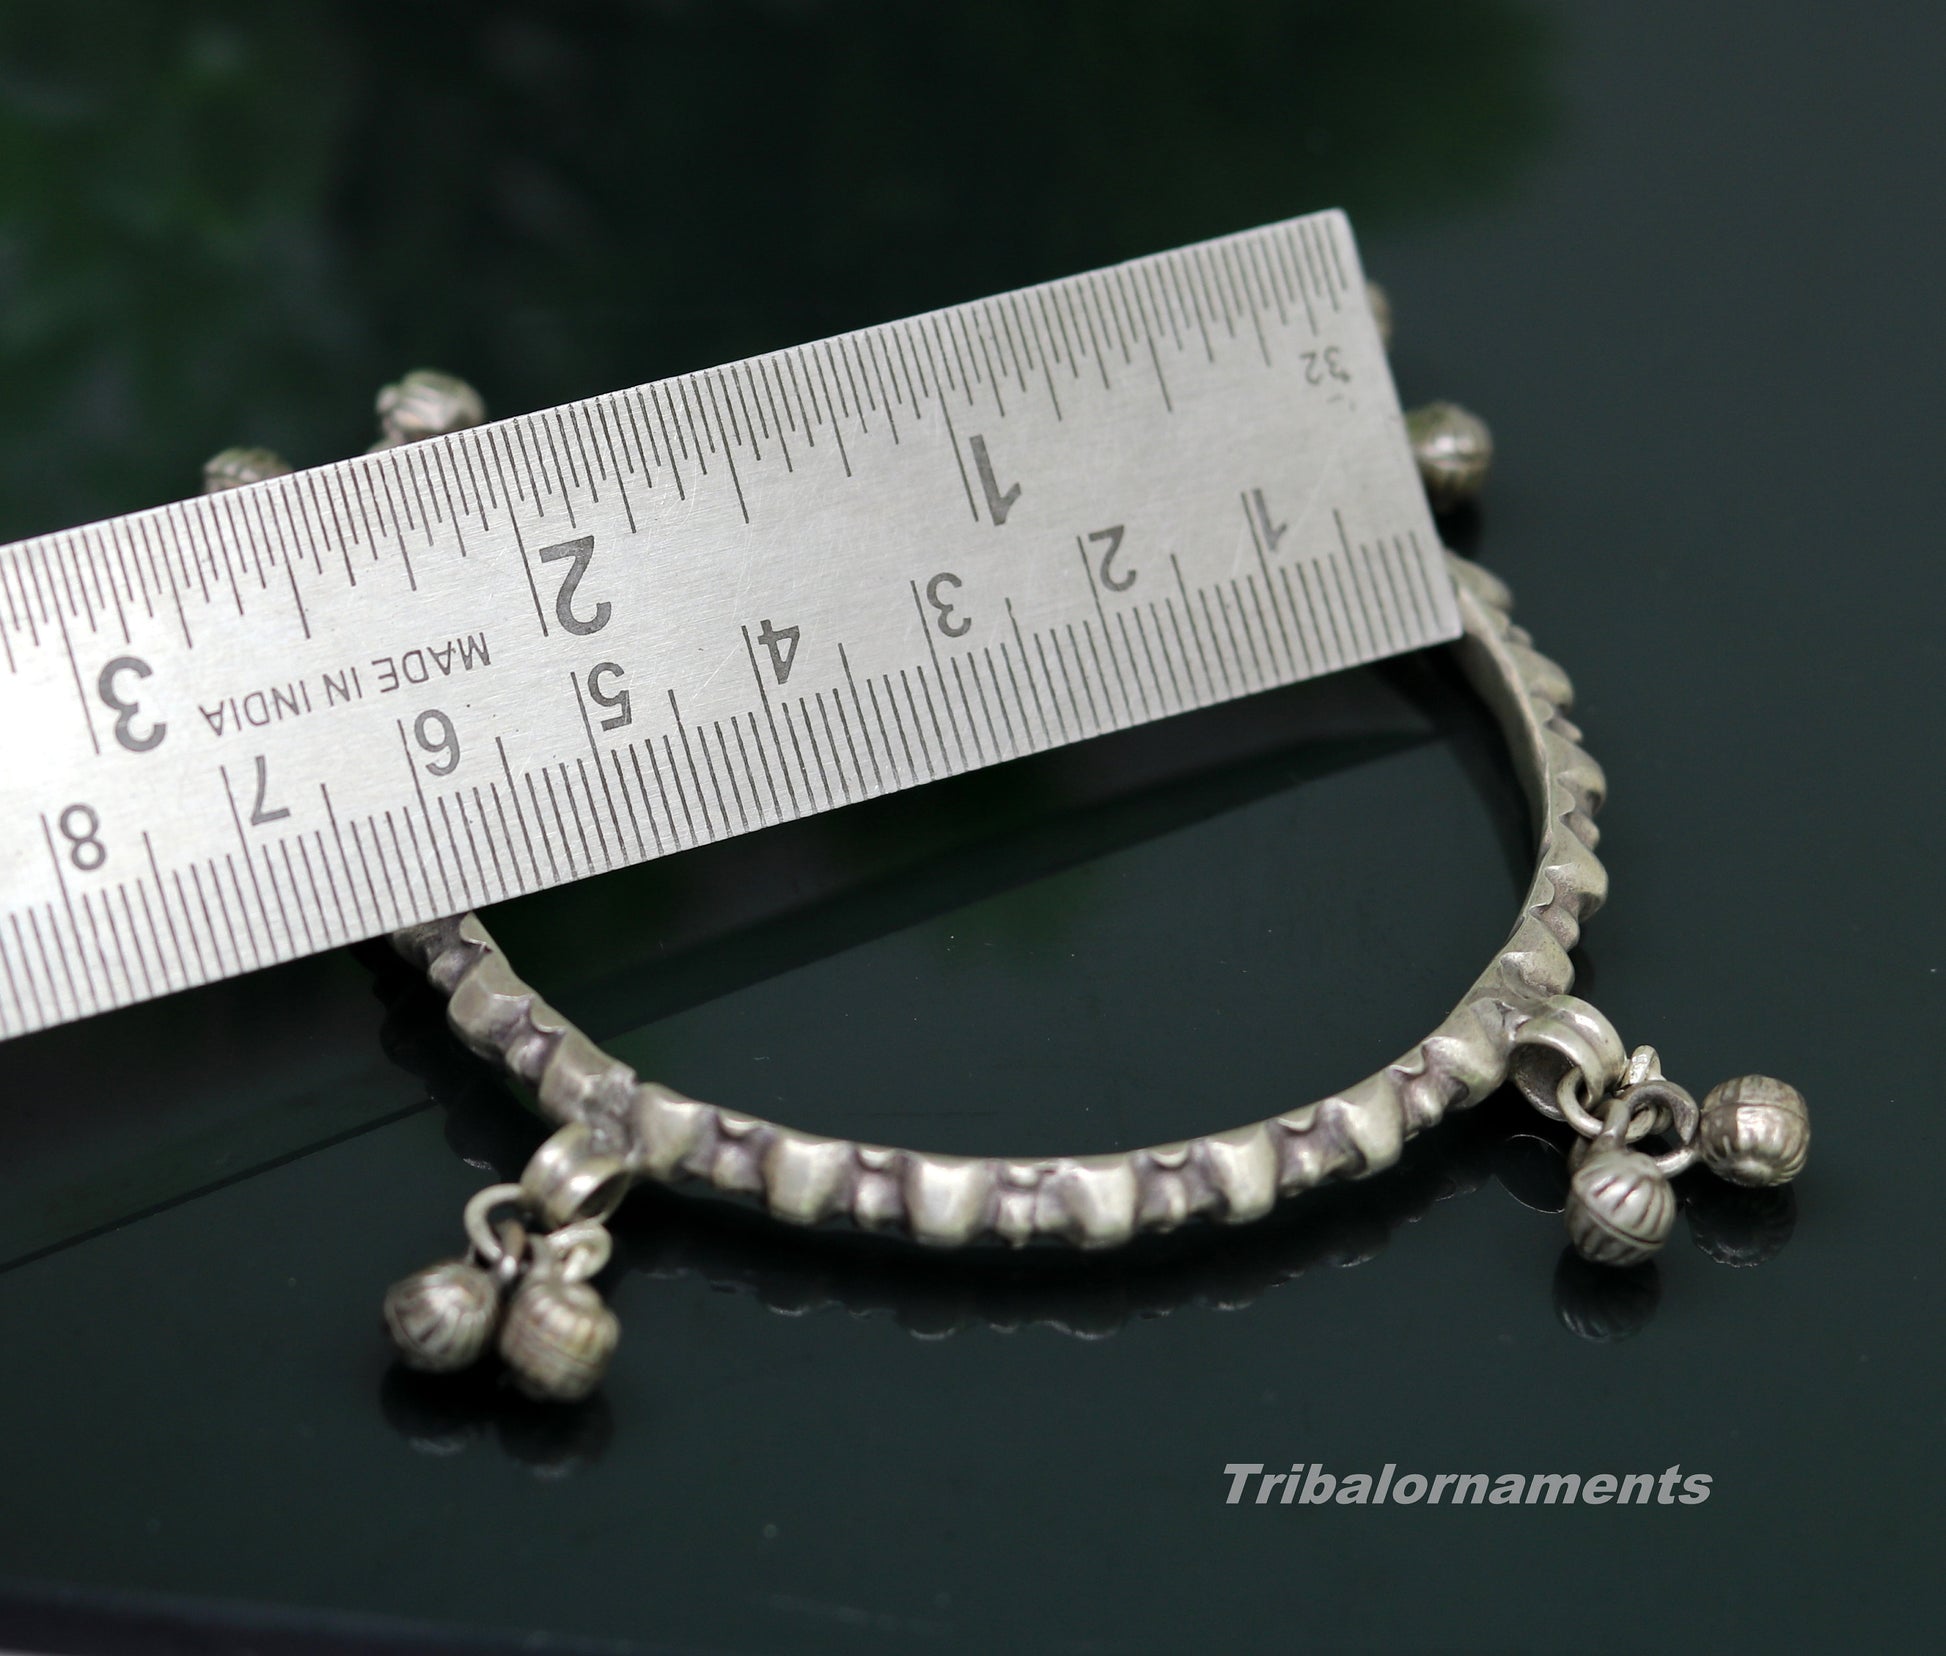 Vintage antique handmade solid silver old used charm bangle bracelet with gorgeous jingle bells tribal customized belly dance jewelry sba18 - TRIBAL ORNAMENTS